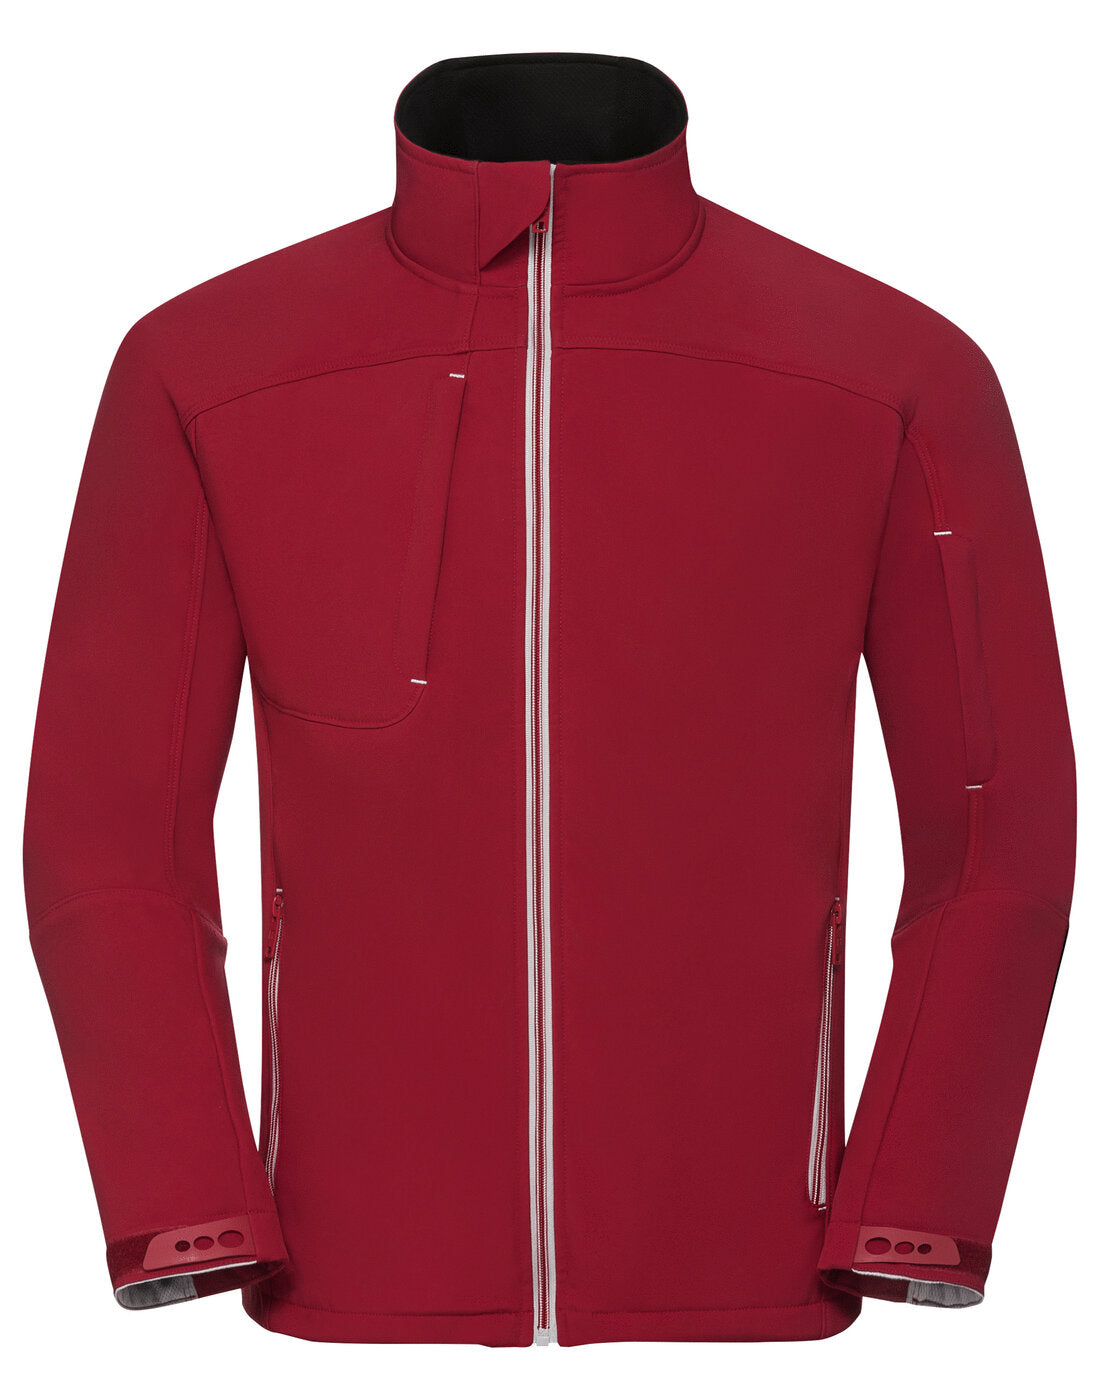 Russell Mens Bionic Softshell Jacket Classic Red